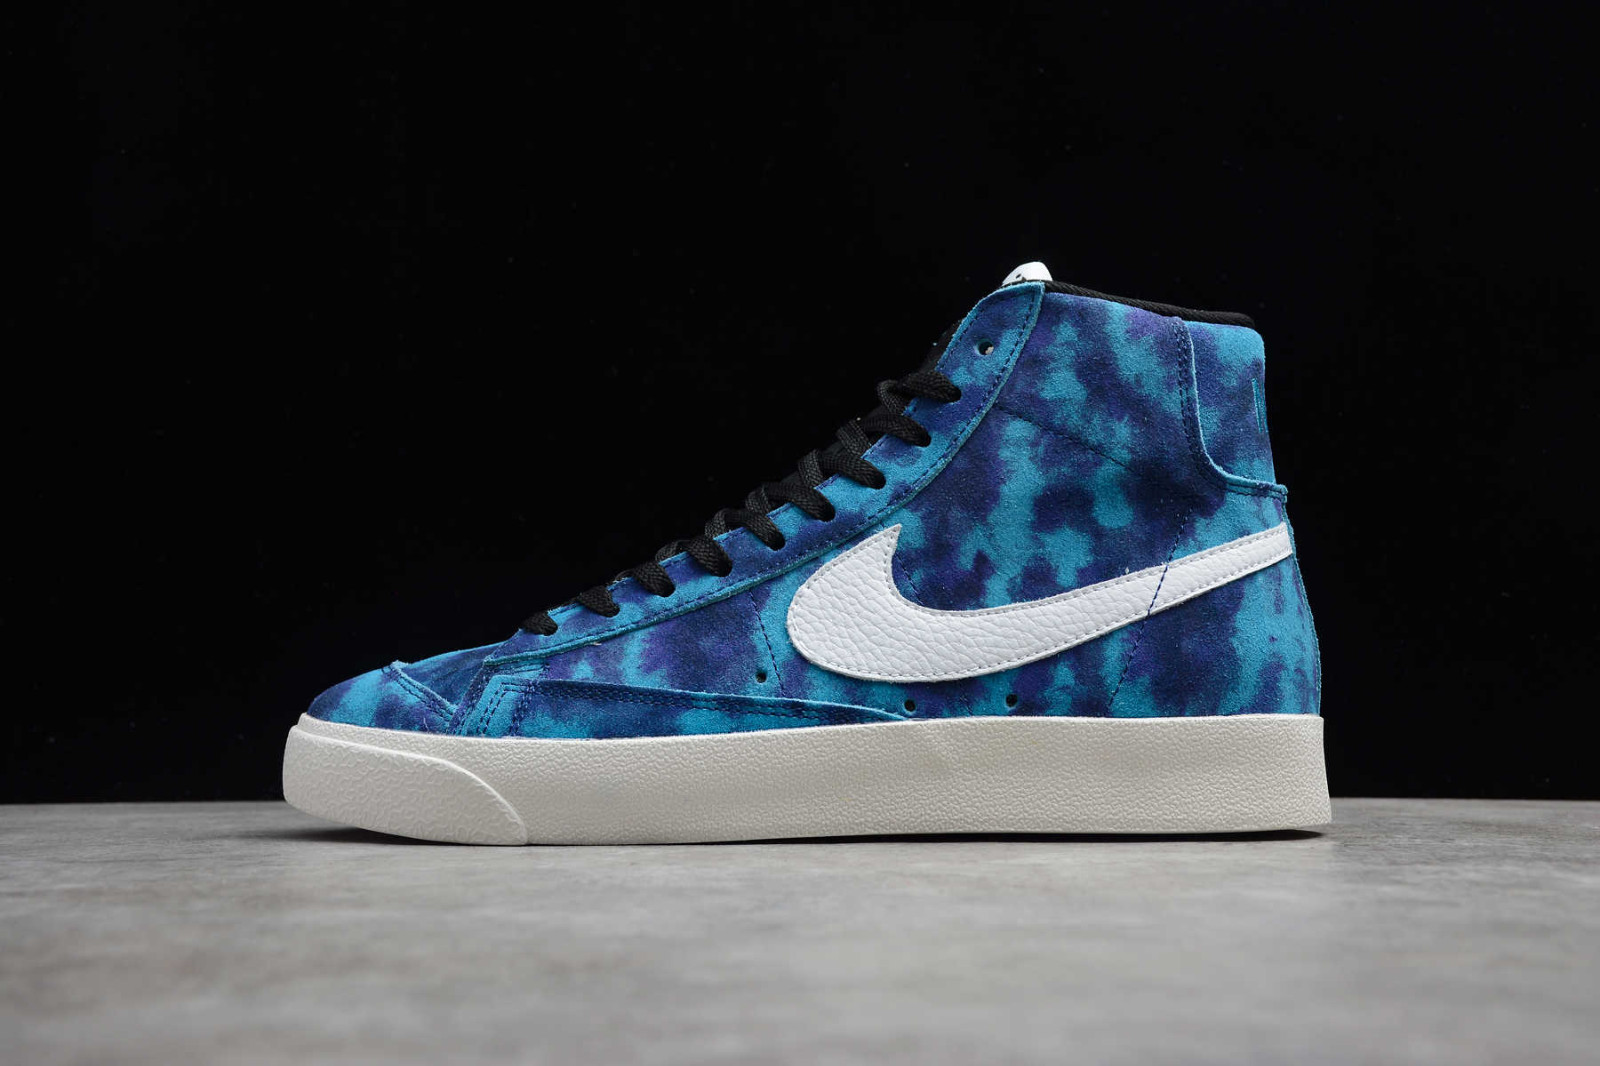 Ariss-euShops - 2020 Nike SB Blazer Mid By You Mengnan Blue Fury White DA7575 - 992 - air max 1 nd leopard trainers shoes